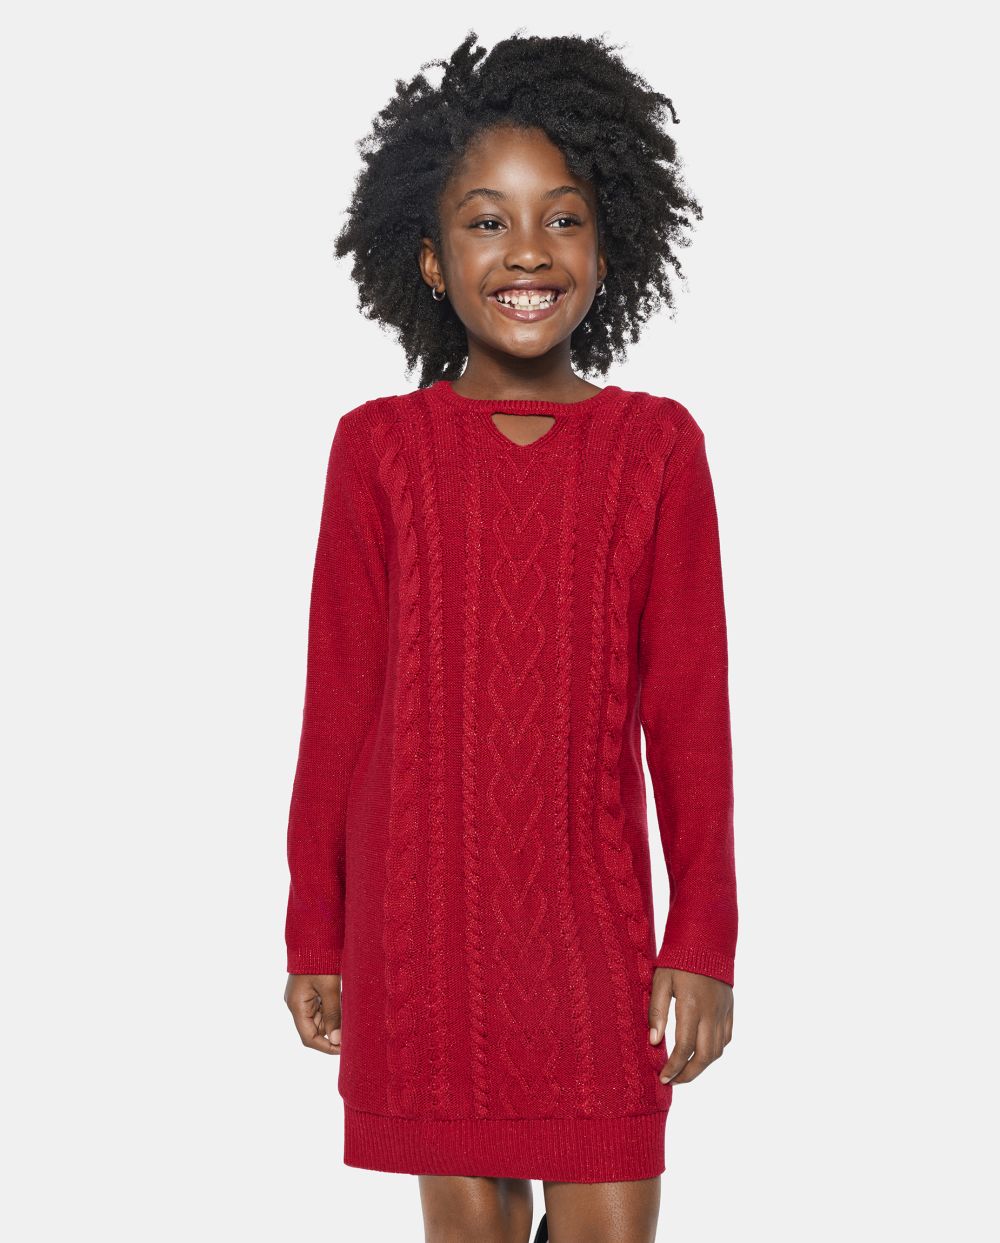 Girls Crew Neck Long Sleeves Cutout Sweater Above the Knee Dress